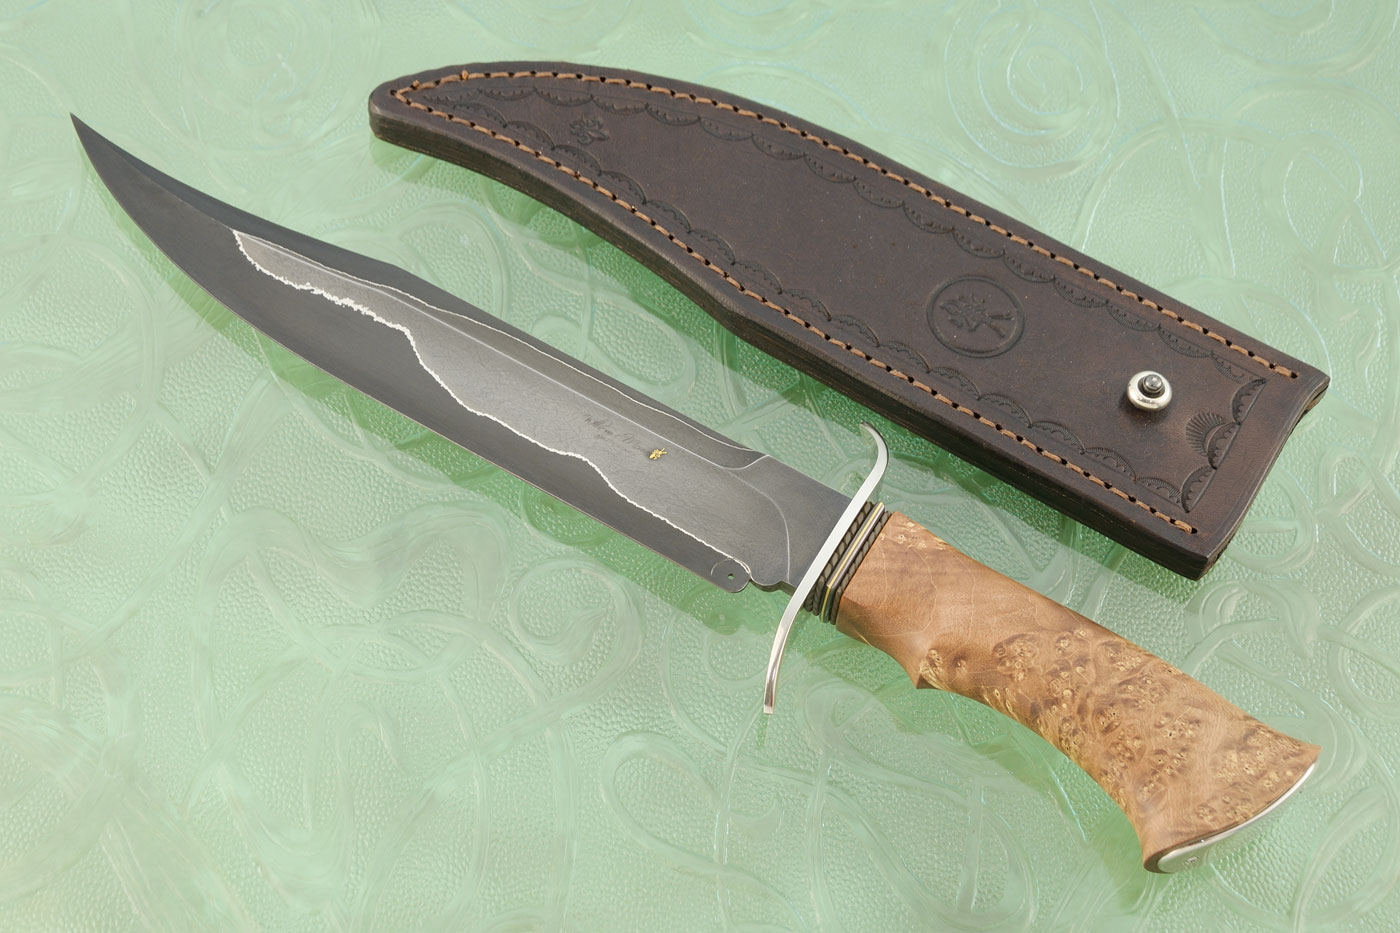 Go-Mai Bowie with Maple Burl, Zirconium, and Gold